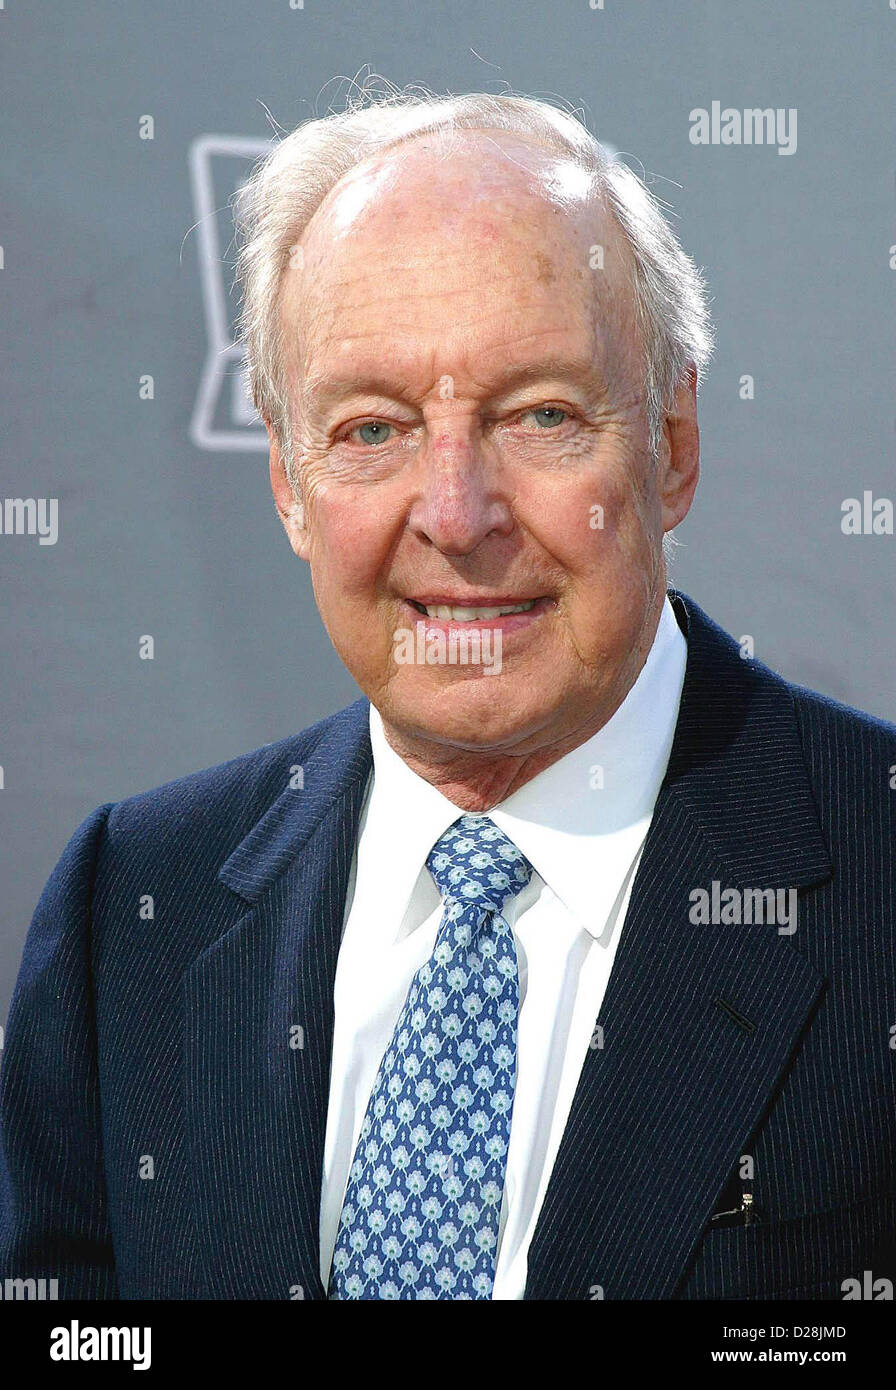 Jan. 16, 2013 - Livermore, California, U.S. - Conrad Bain, the Canadian-born actor  who played father figure Phillip Drummond on ''Diff'rent Strokes'' has died of natural causes. Bain is known for playing the white adoptive father of two African-American brothers on the hit ''Diff'rent Strokes'' that turned Gary Coleman into a TV star. PICTURED: March 2, 2003 - Hollywood, California, U.S. - CONRAD BAIN at the TV Land Awards. (Credit Image: © Clinton Wallace/Globe Photos/ZUMAPRESS.com) Stock Photo